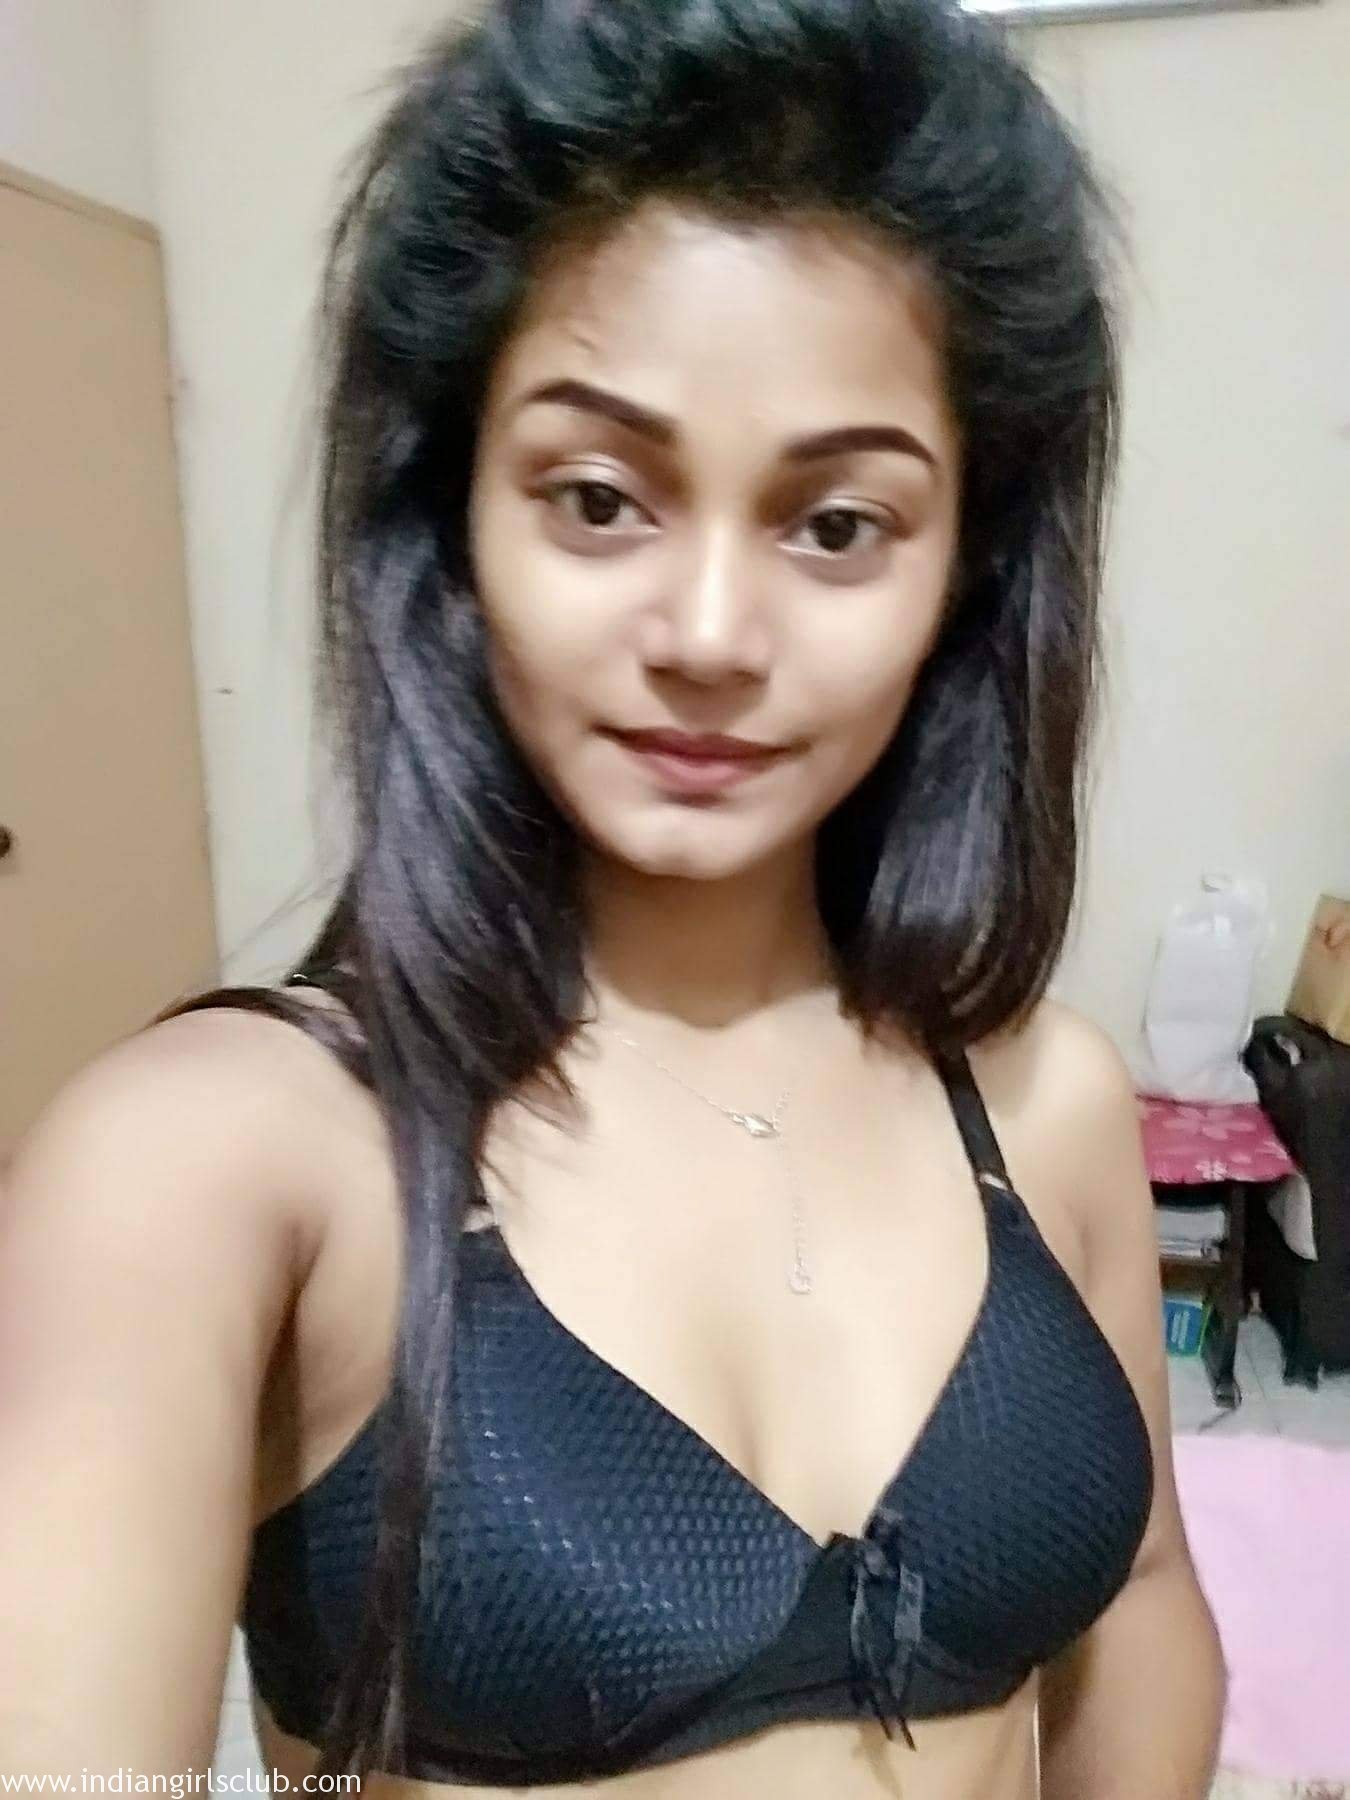 juicy_indian_teen_homemade_porn_1 - Indian Girls Club picture